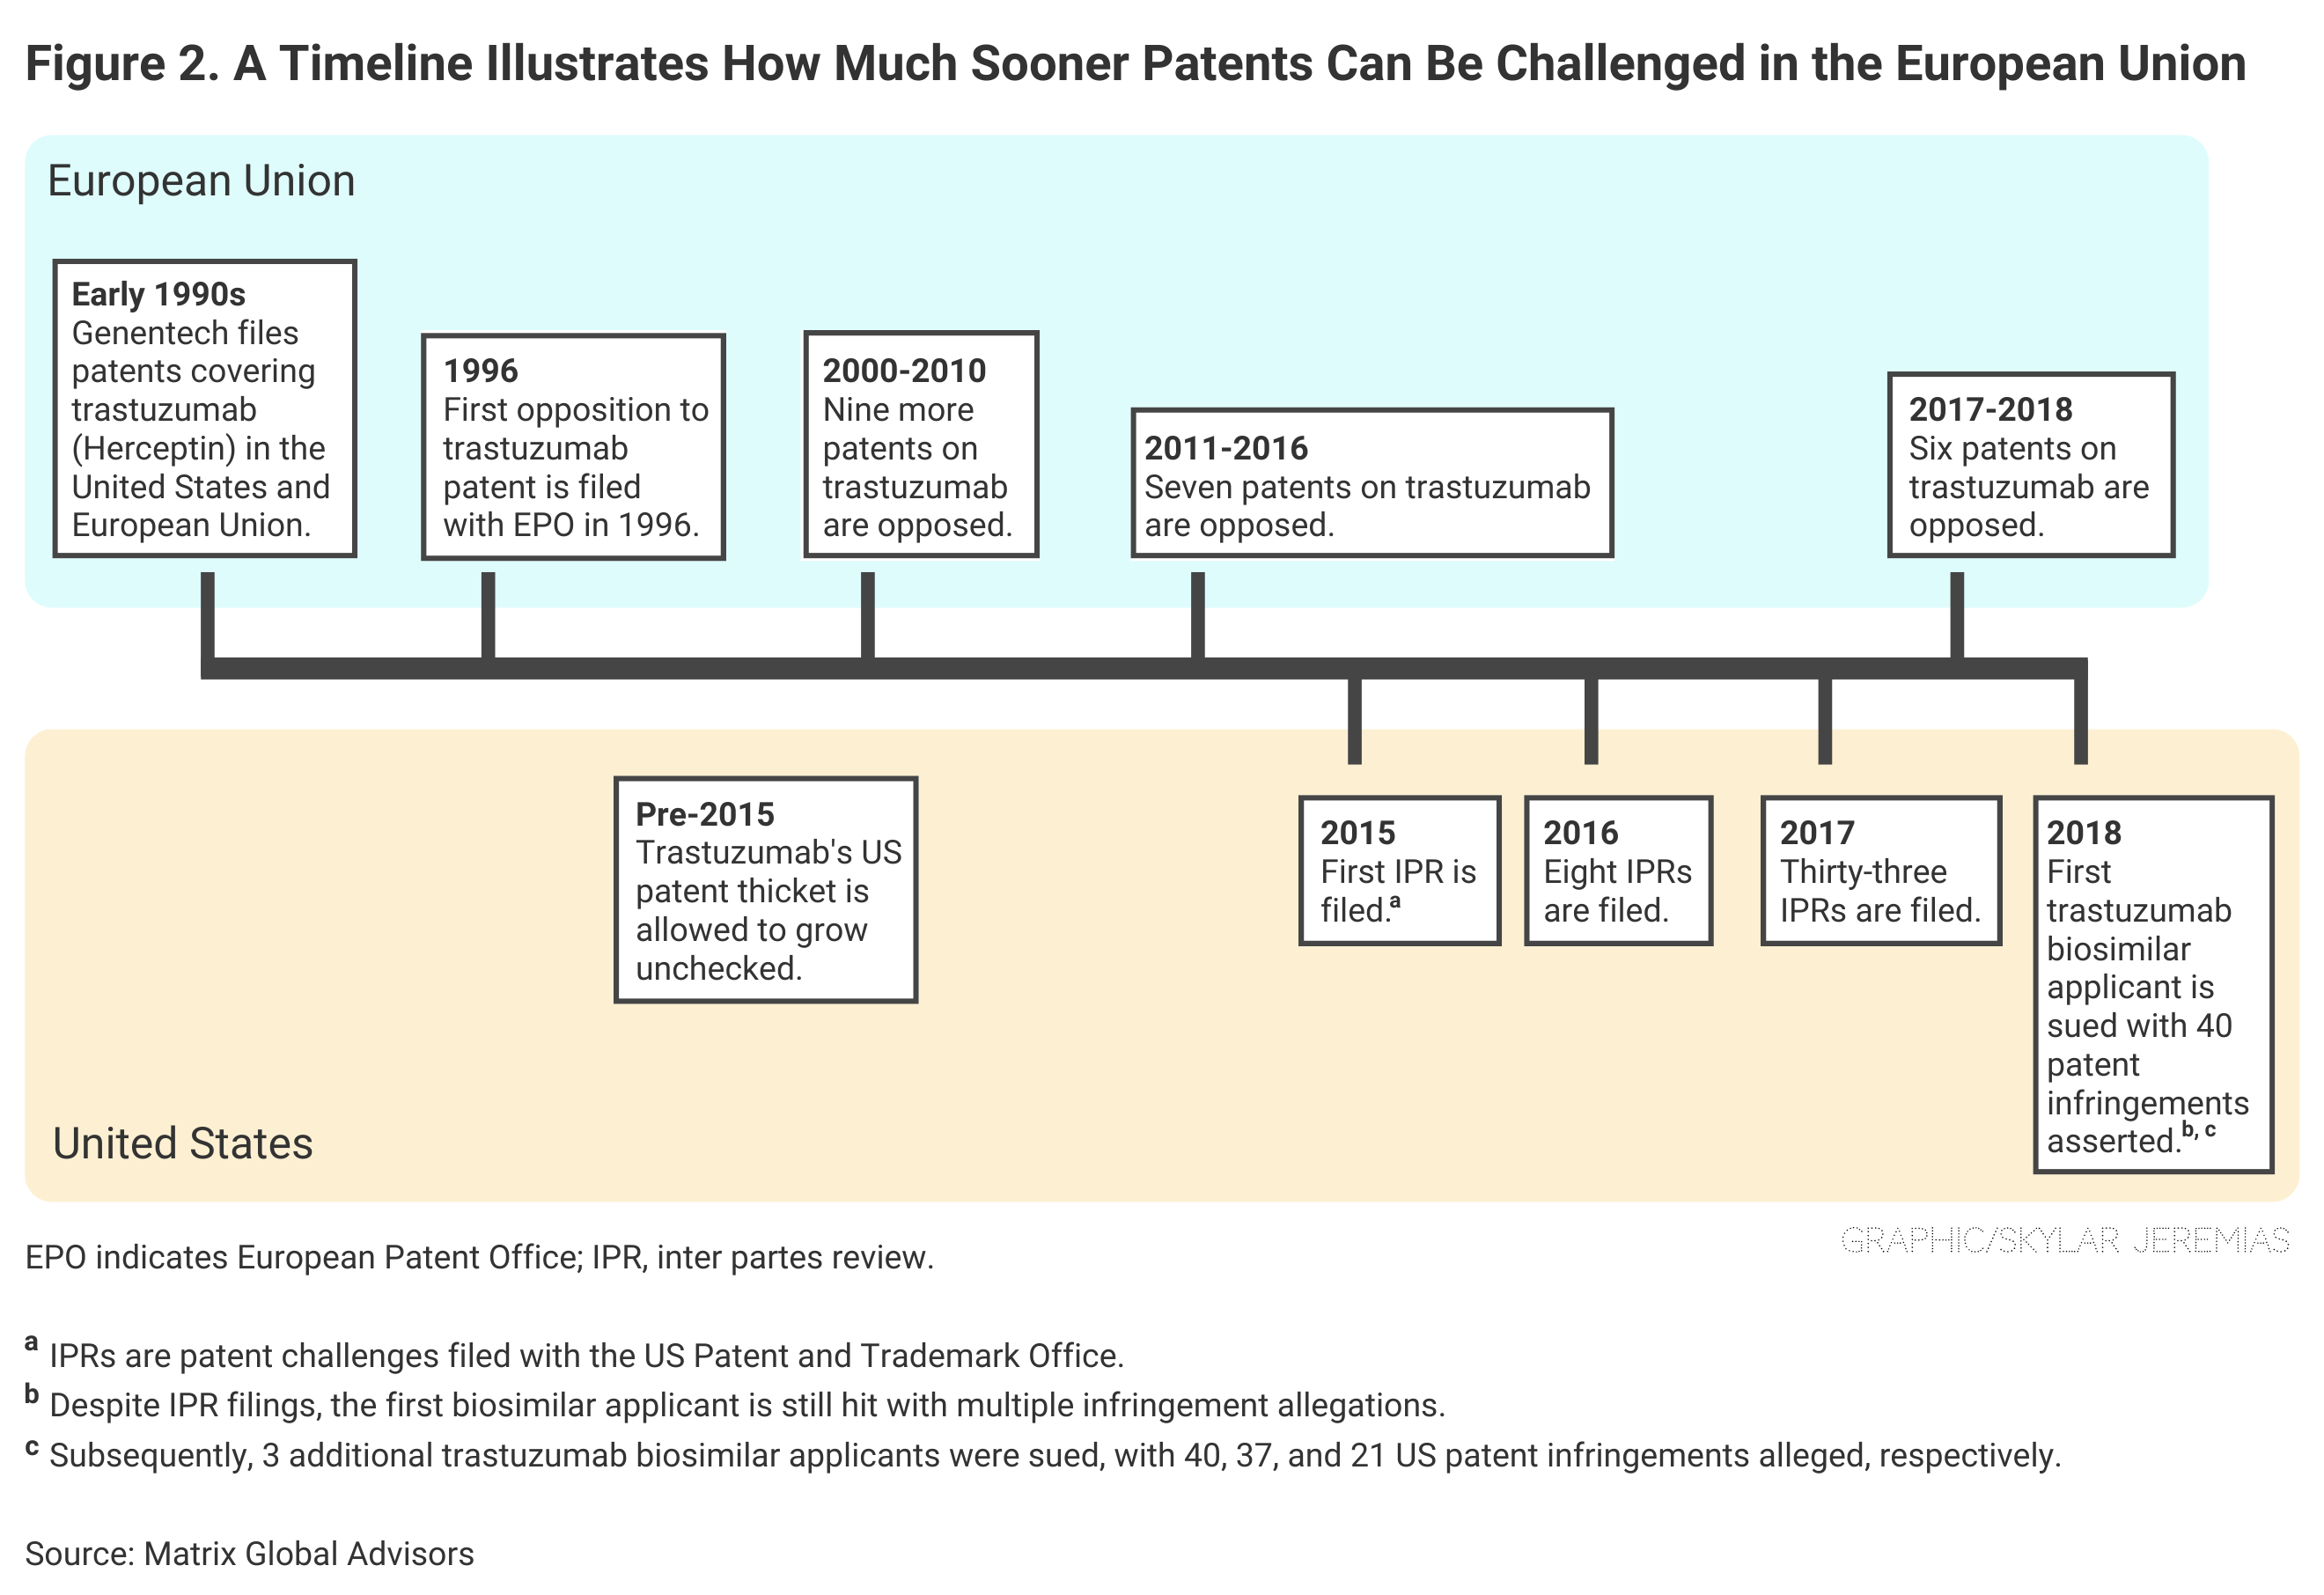 Figure. A Timeline Illustrates How Much Sooner Patents Can Be Challenged in the European Union